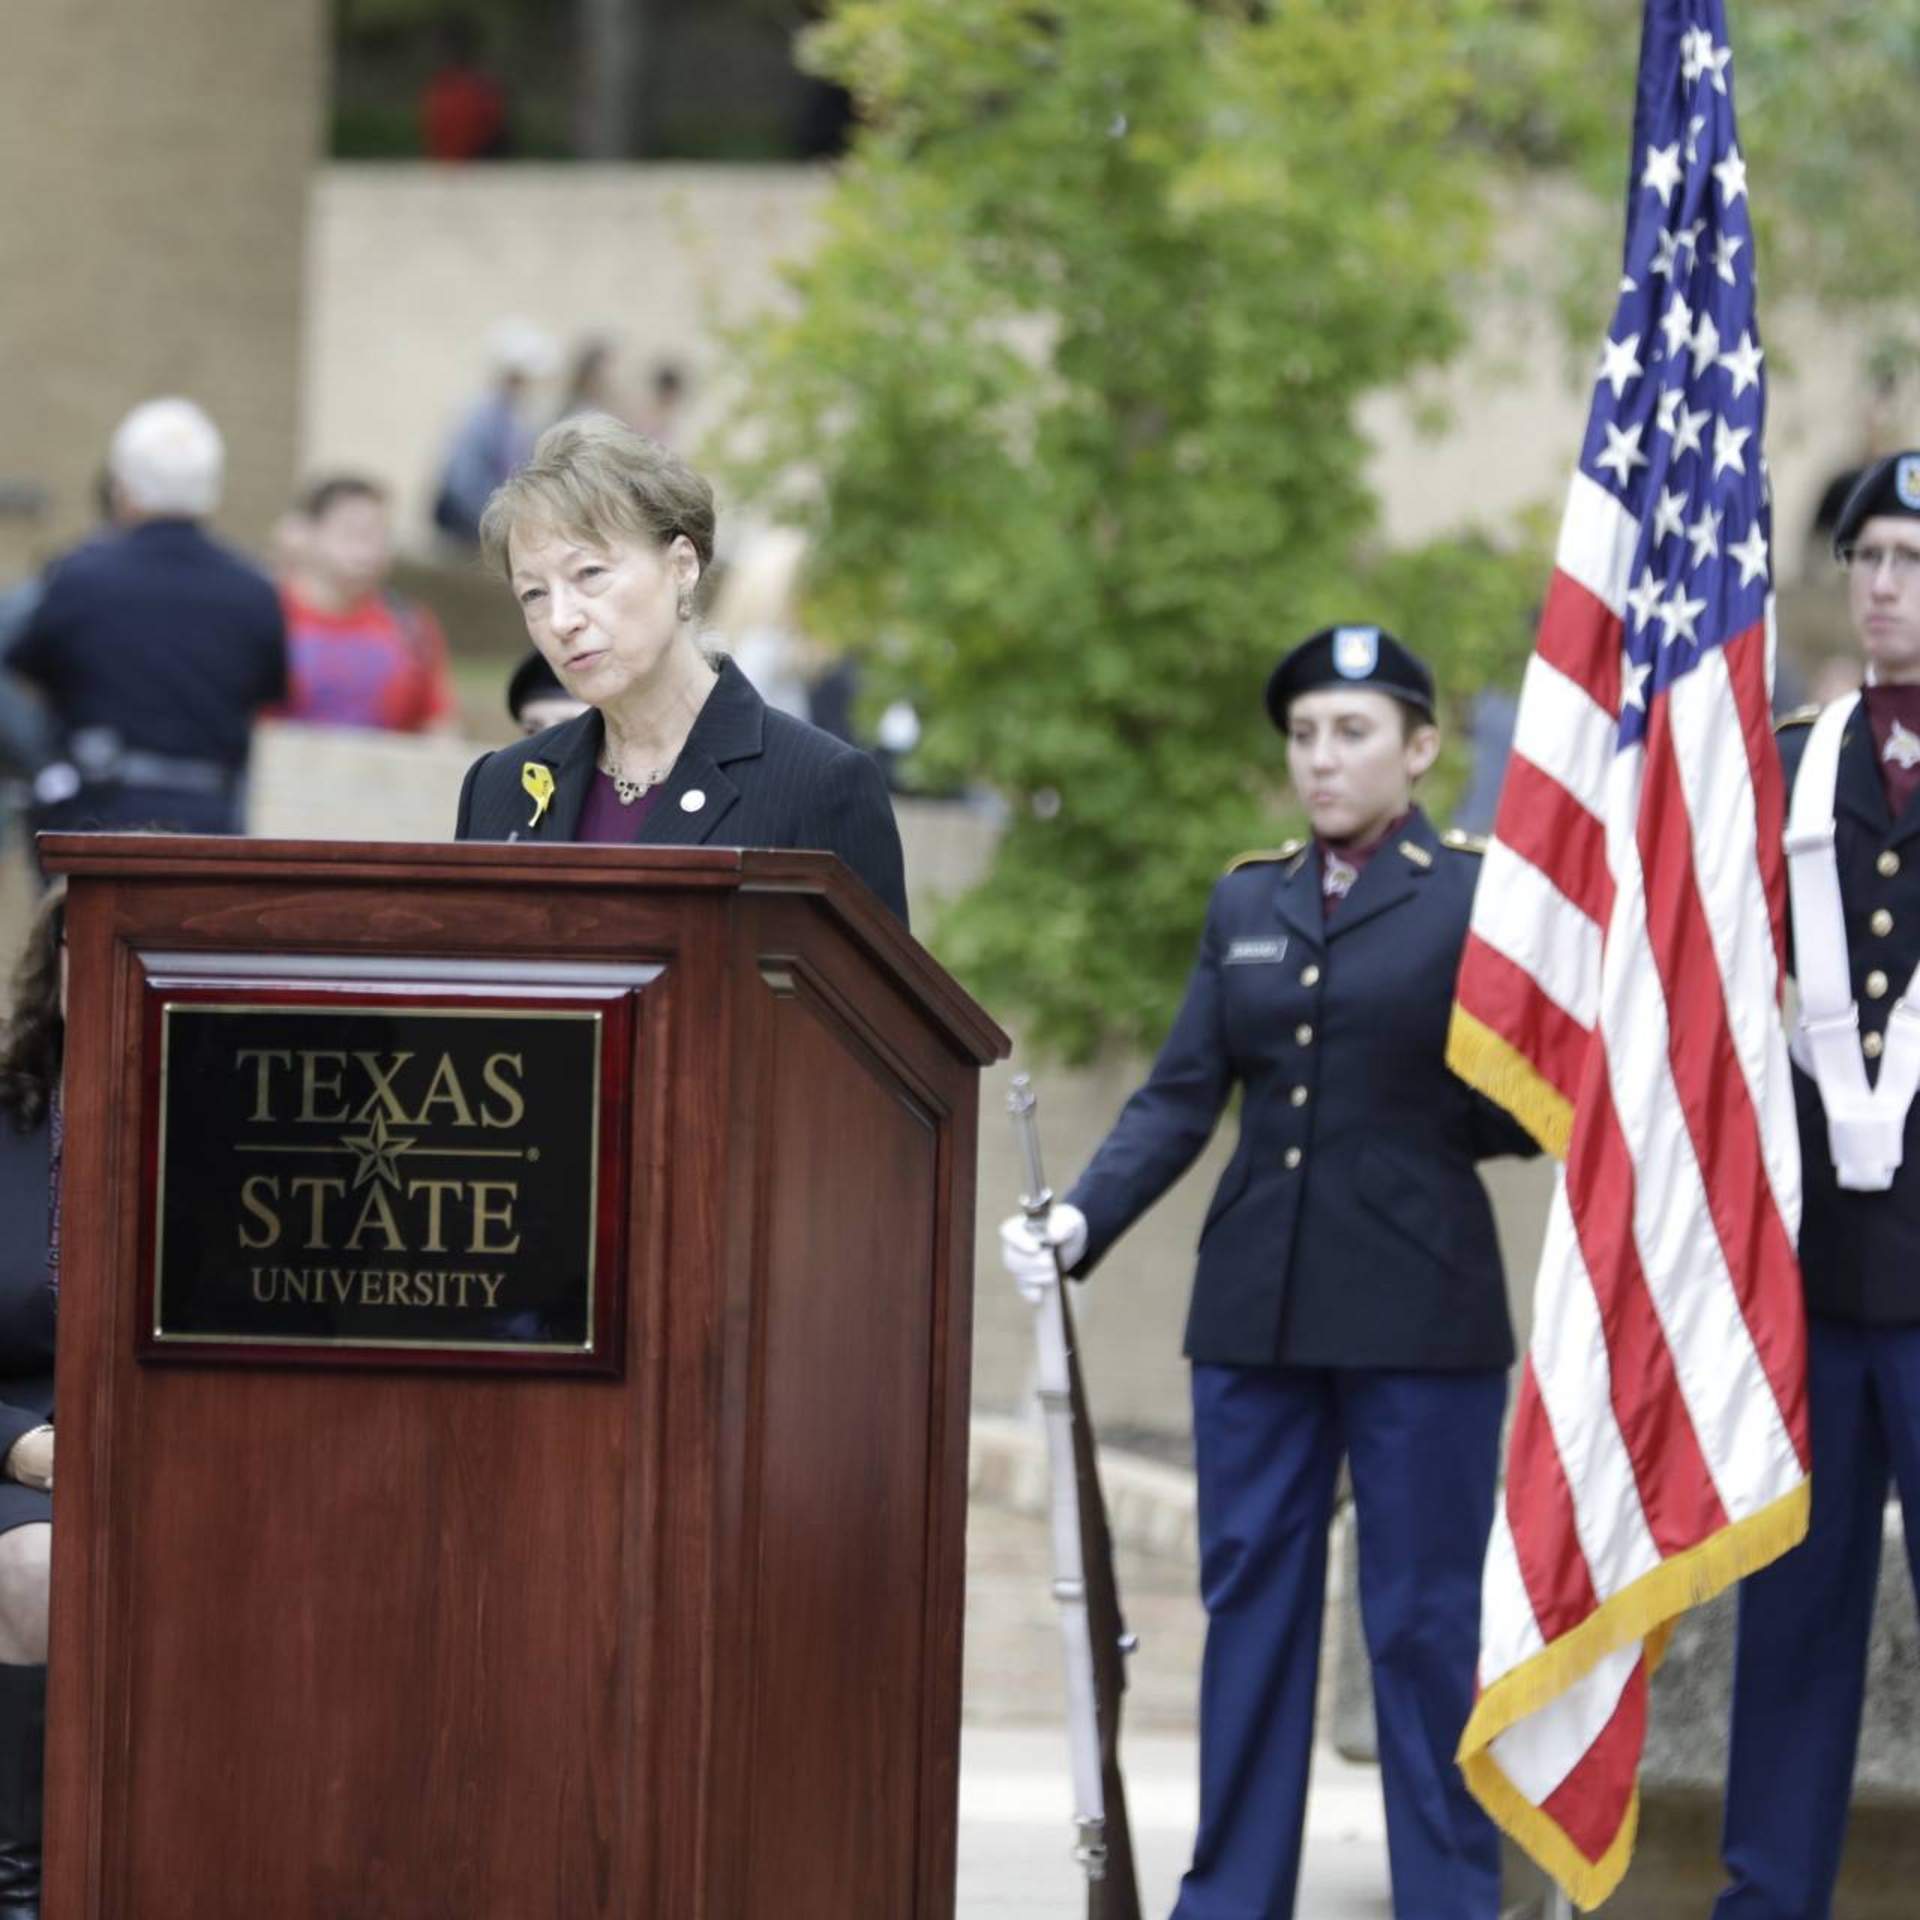 President Trauth speaks at Veterans Day event